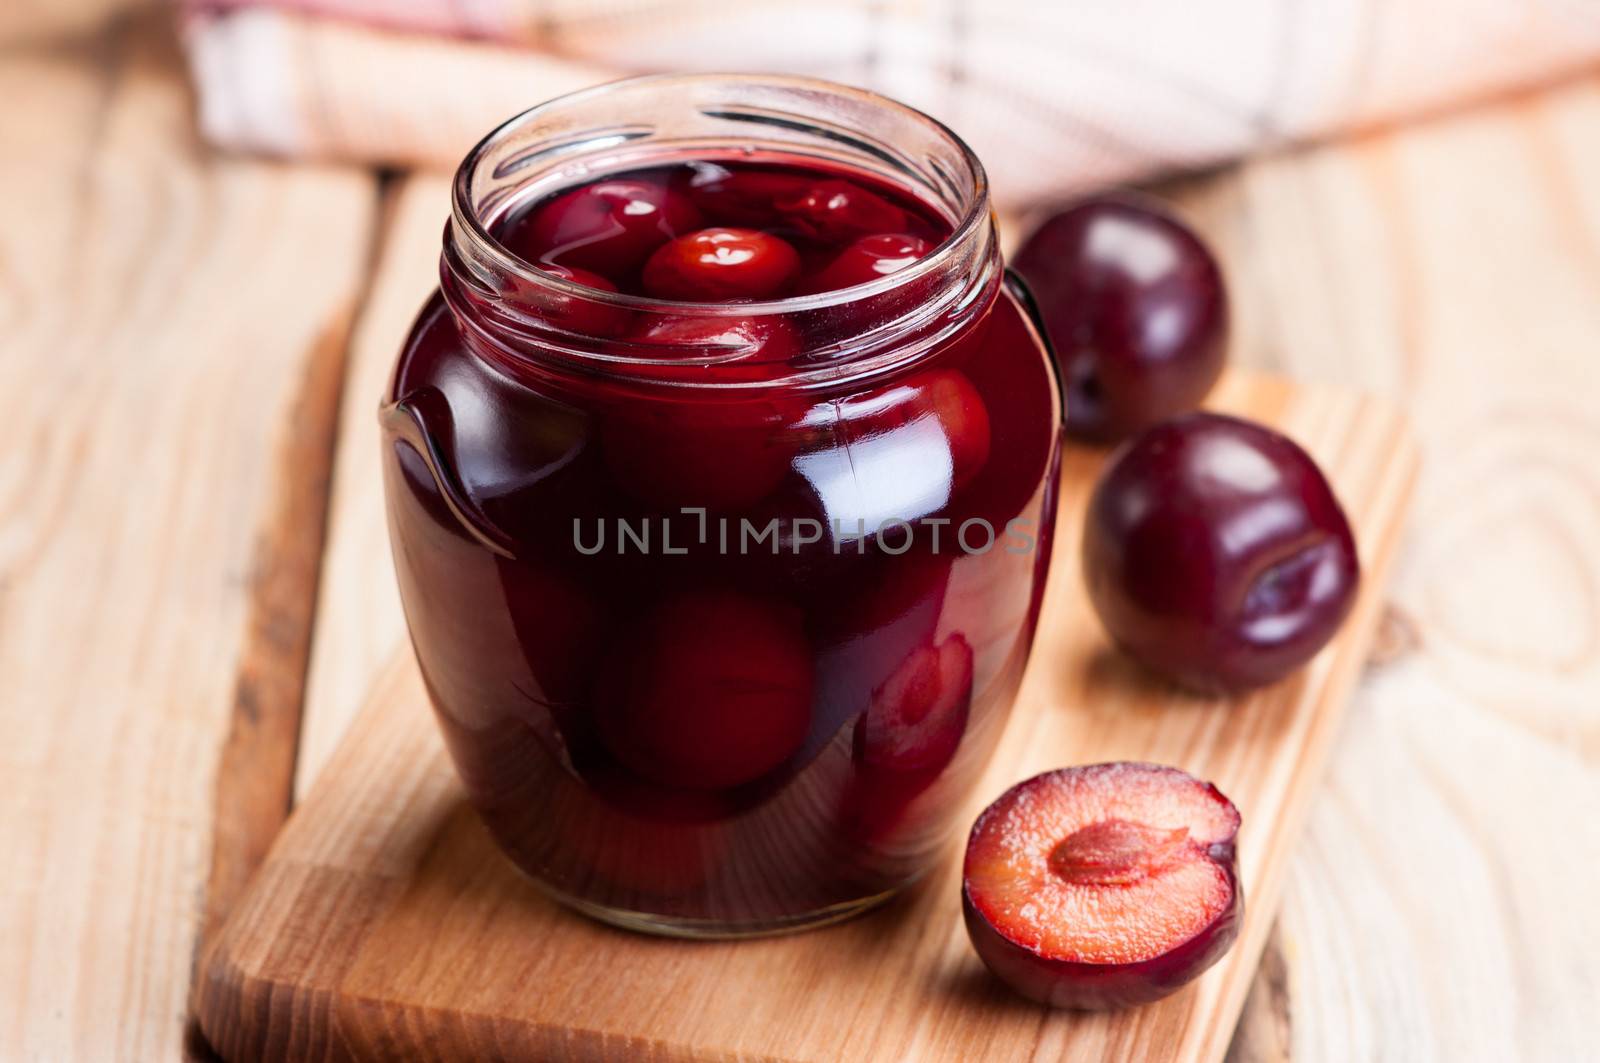 Plum compote in glass jar on wooden table.